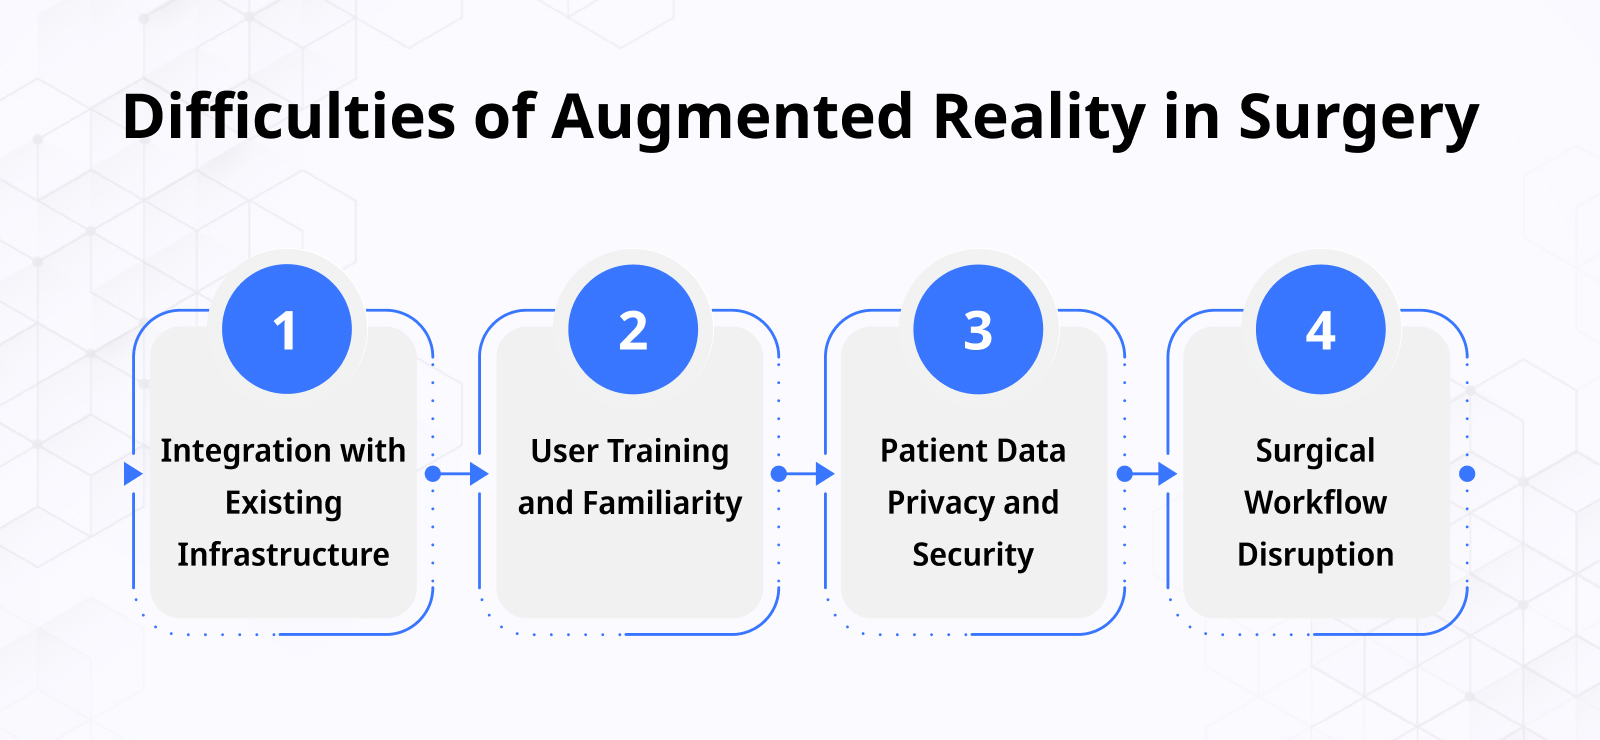 Difficulties of Augmented Reality in Surgery